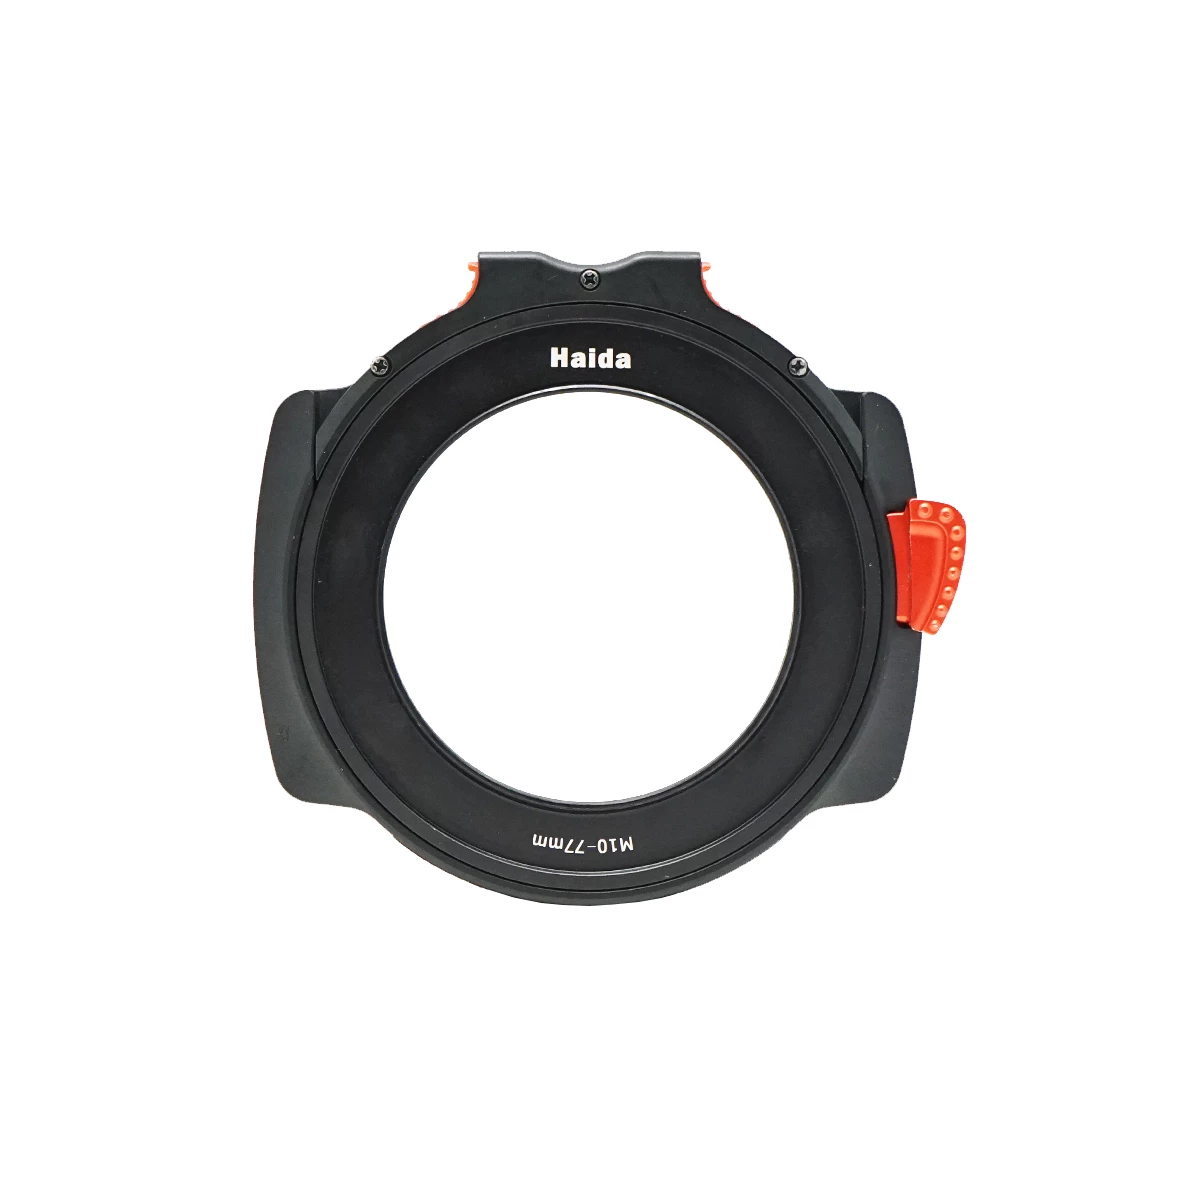 HAIDA M10 FILTER HOLDER KIT WITH 77mm ADAPTER RING  - SCORE 8